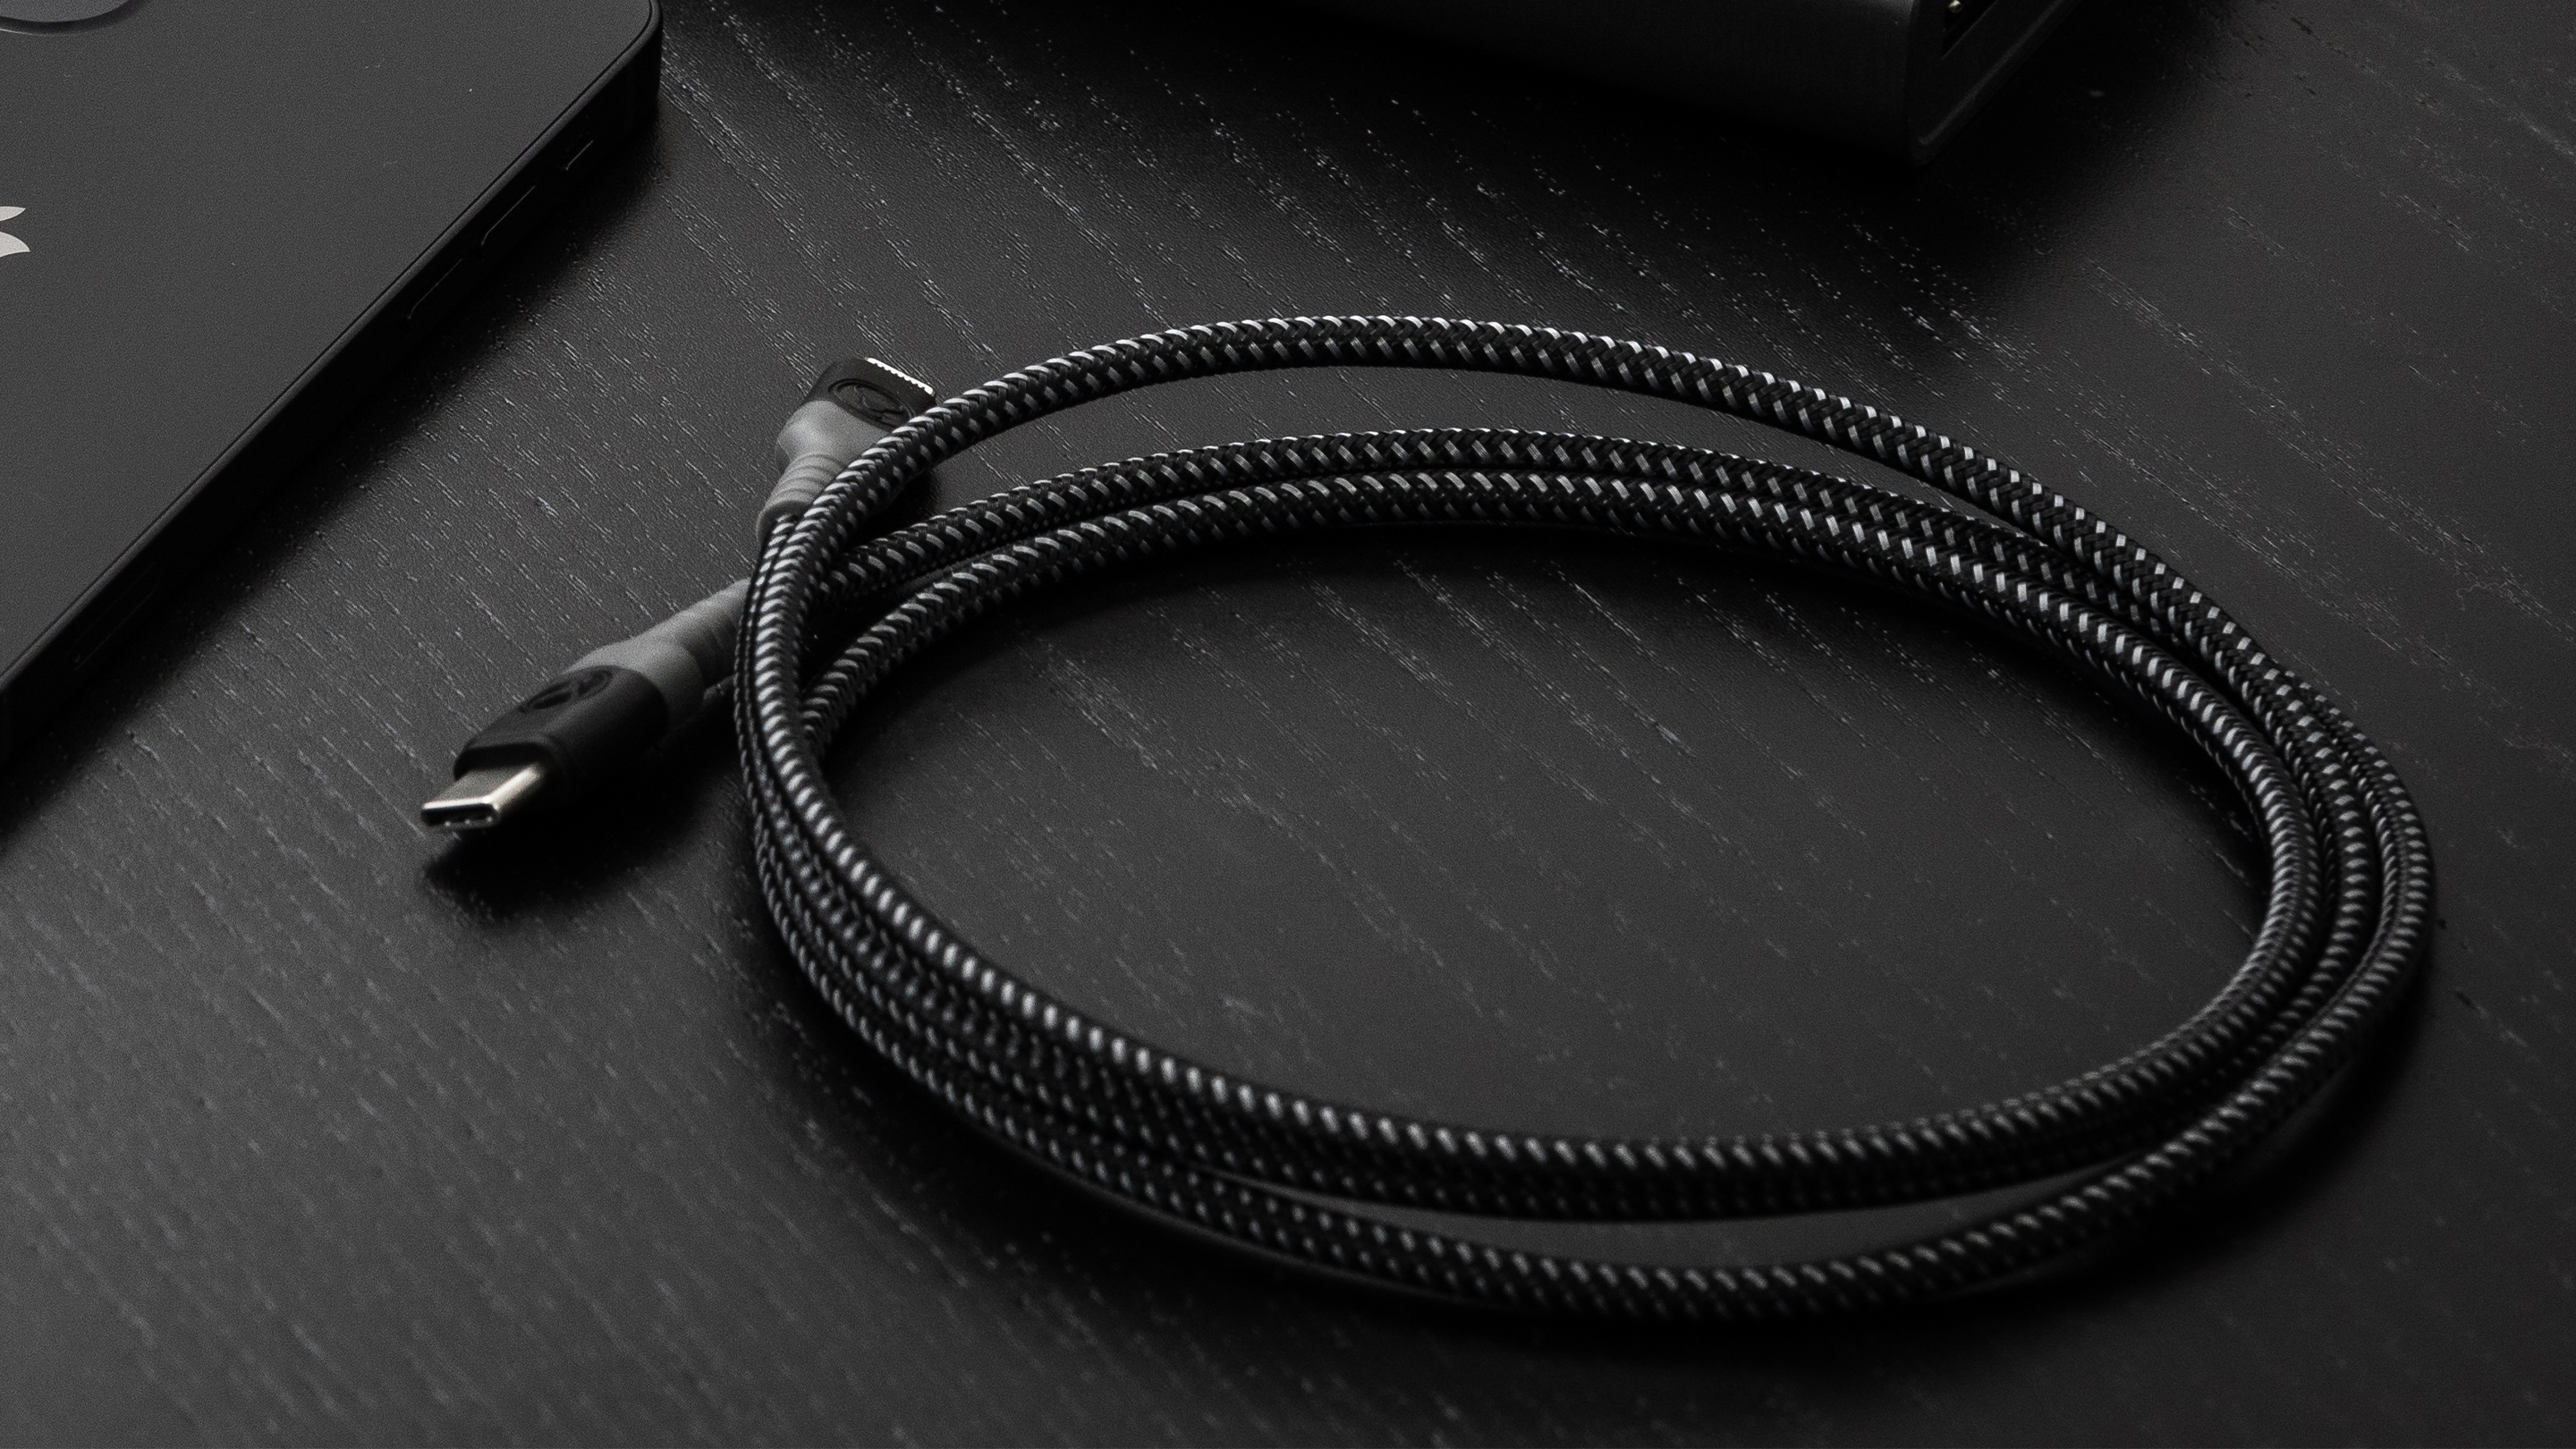  Nomad Lightning Cable, 3.0 Meters